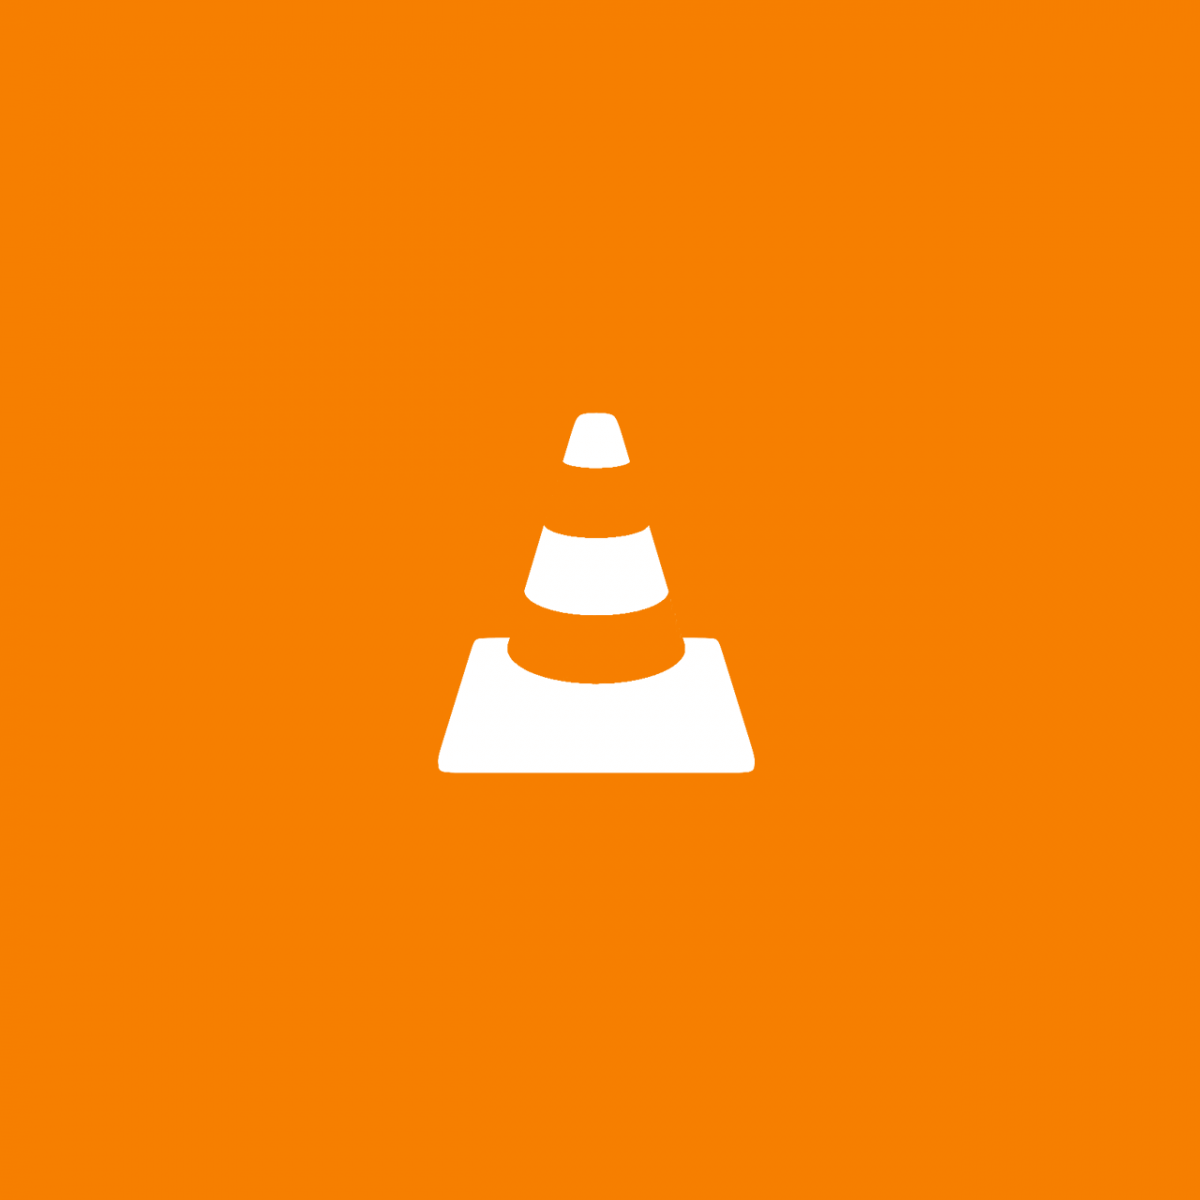 where can i download free movies for my vlc media player